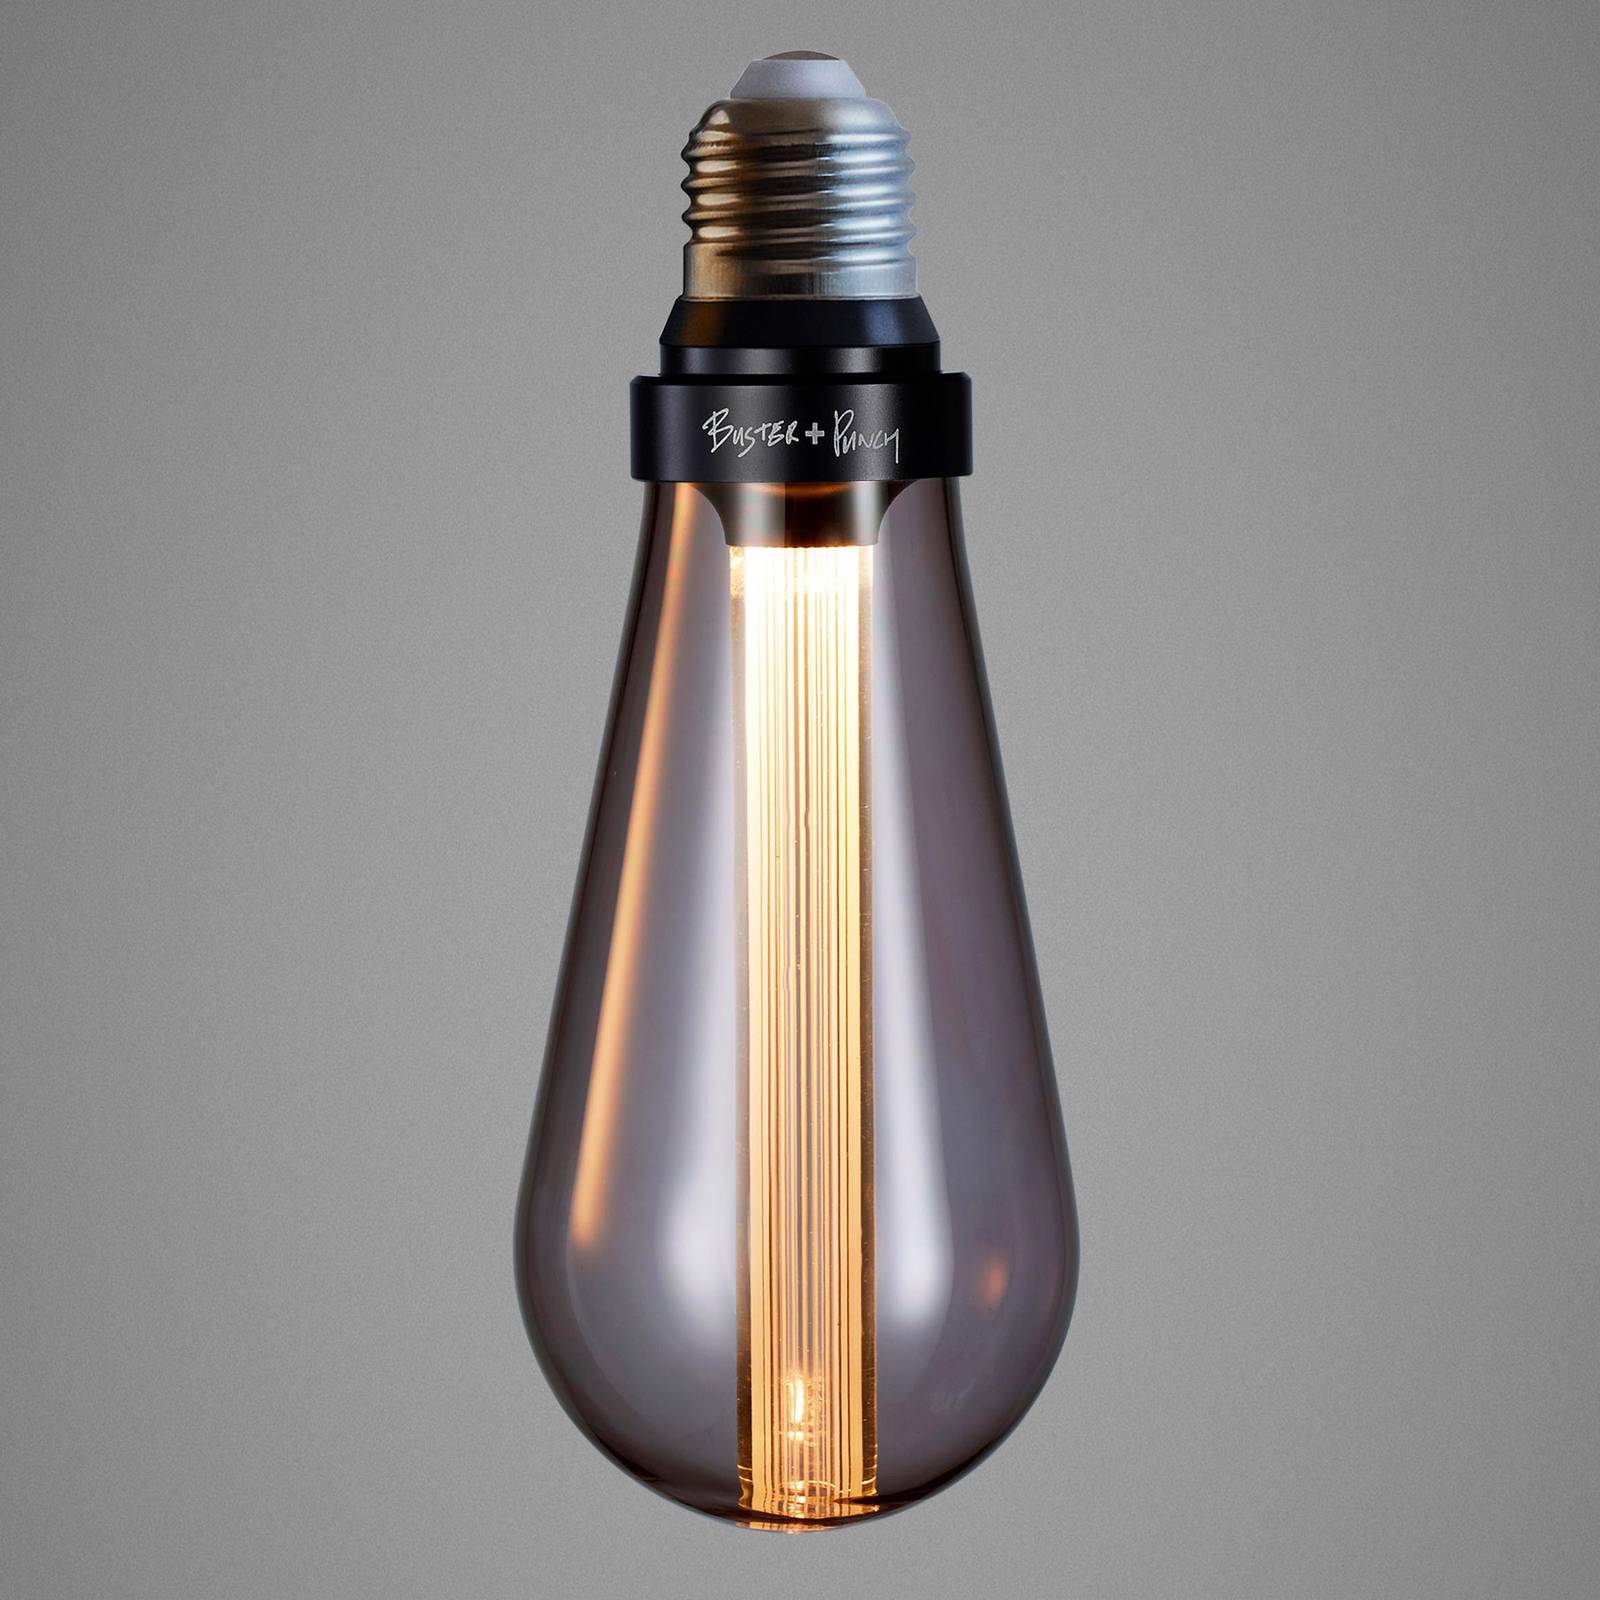 Buster + Punch LED-Lampe E27 2W dimmbar smoked von Buster + Punch